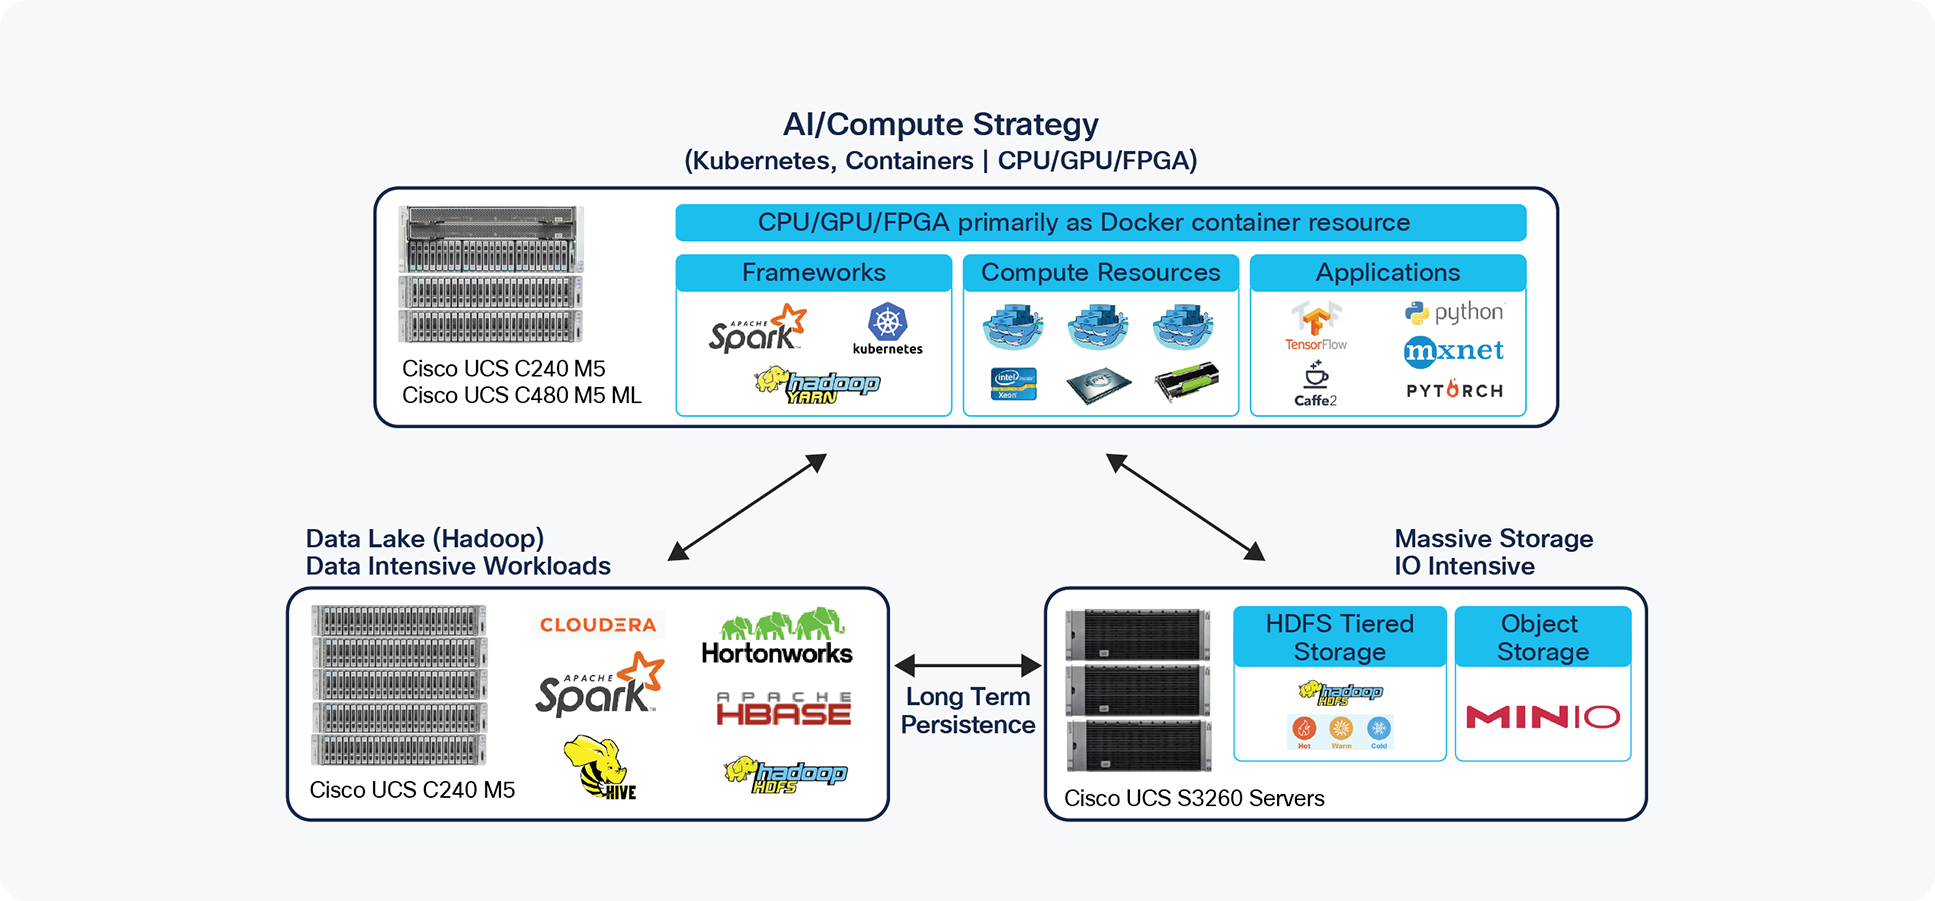 Cisco Data Intelligence Platform with MinIO and software stack and ISV partners